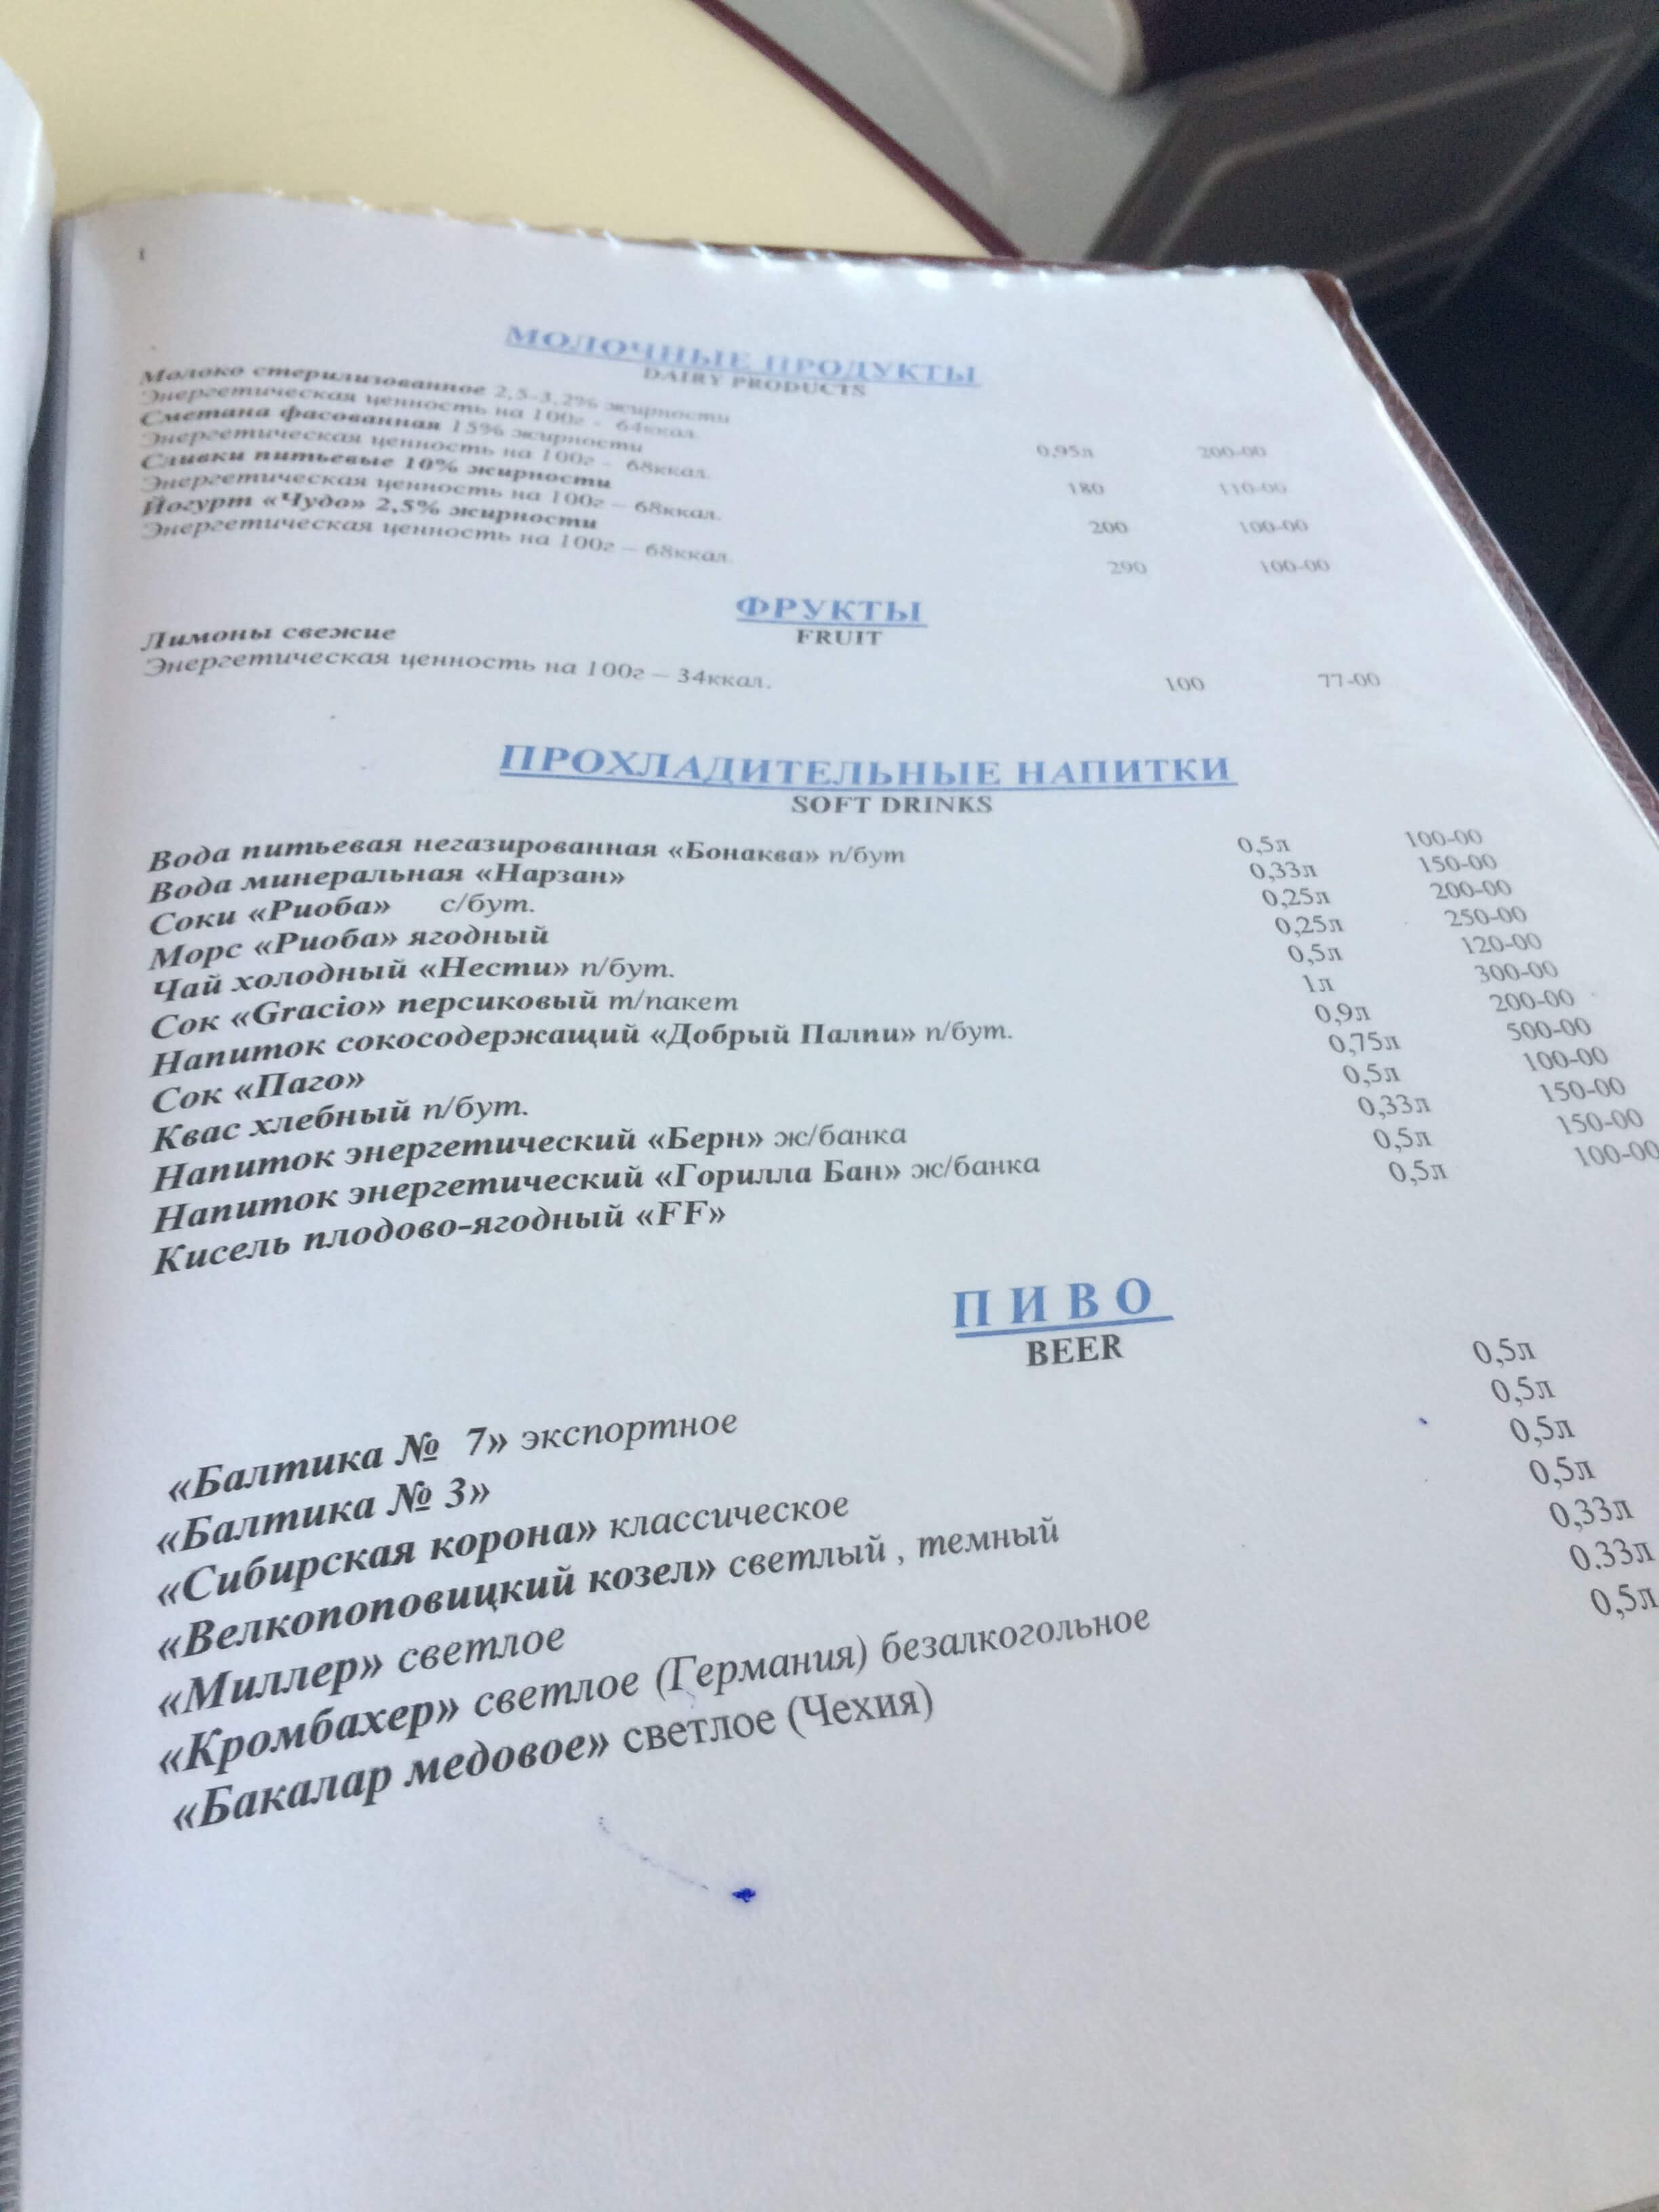 Example of the menu in the train restaurant